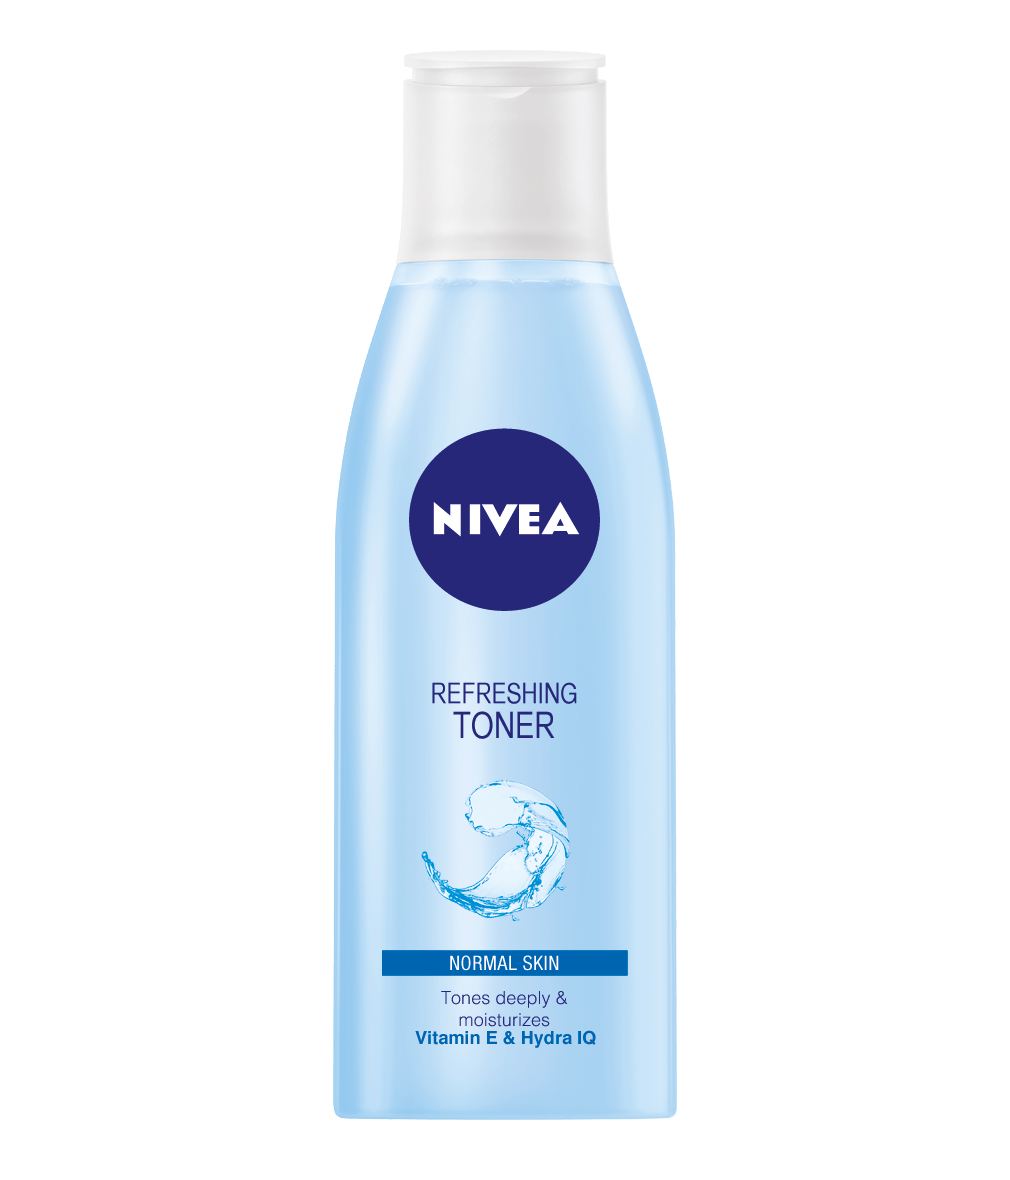 https://www.nivea.ph/~/images/media-center-items/b/a/3-104290-1.png?mw=1200